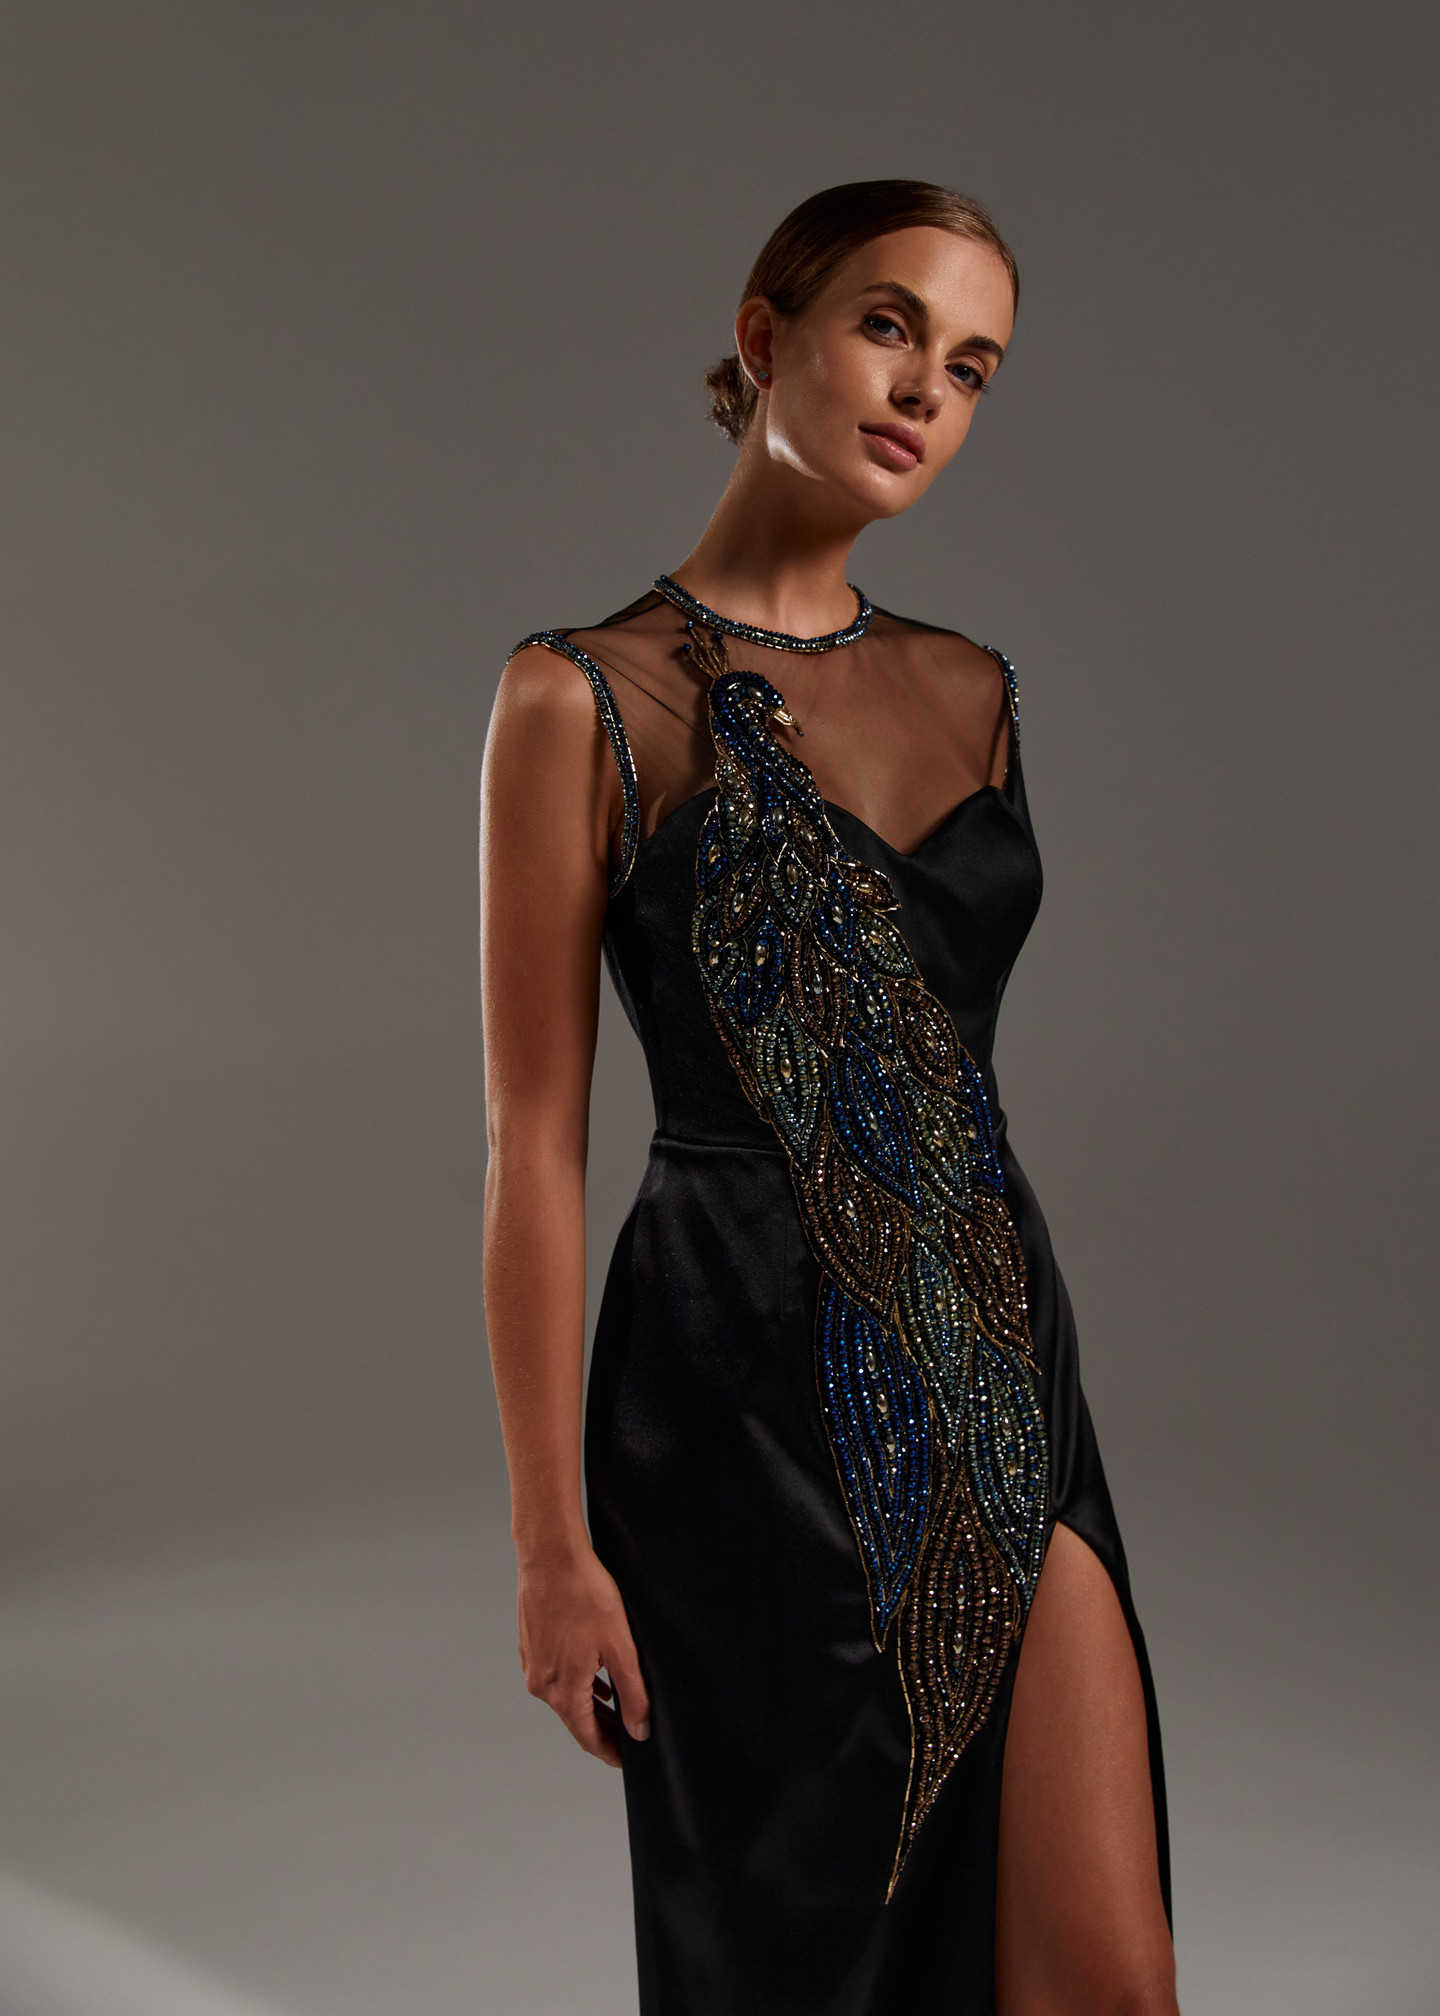 Peacock dress, 2021, couture, dress, evening, black, embroidery, sheath silhouette, popular